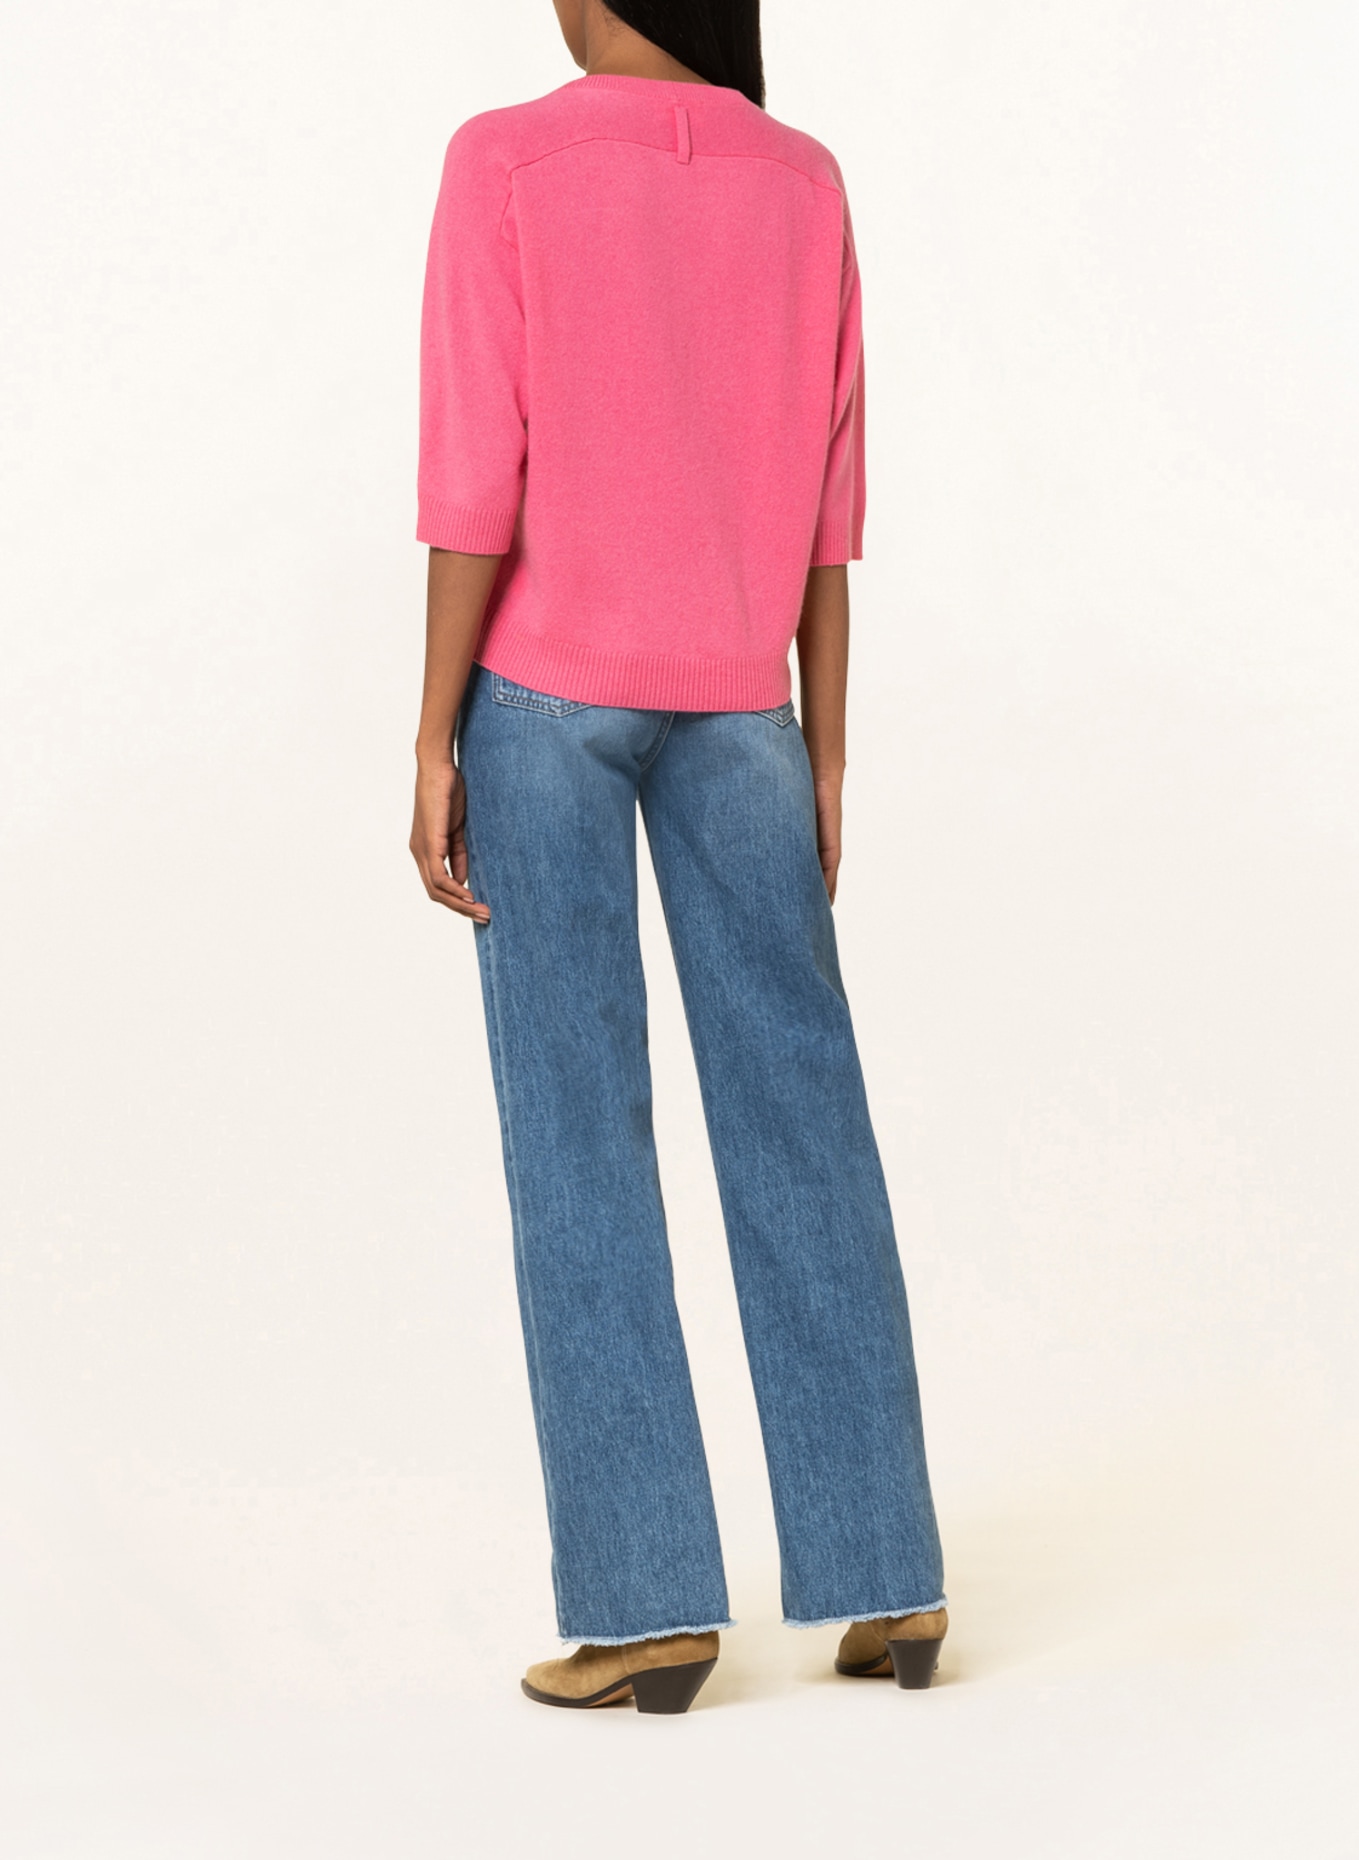 HEMISPHERE Cashmere sweater with 3/4 sleeves, Color: PINK (Image 3)